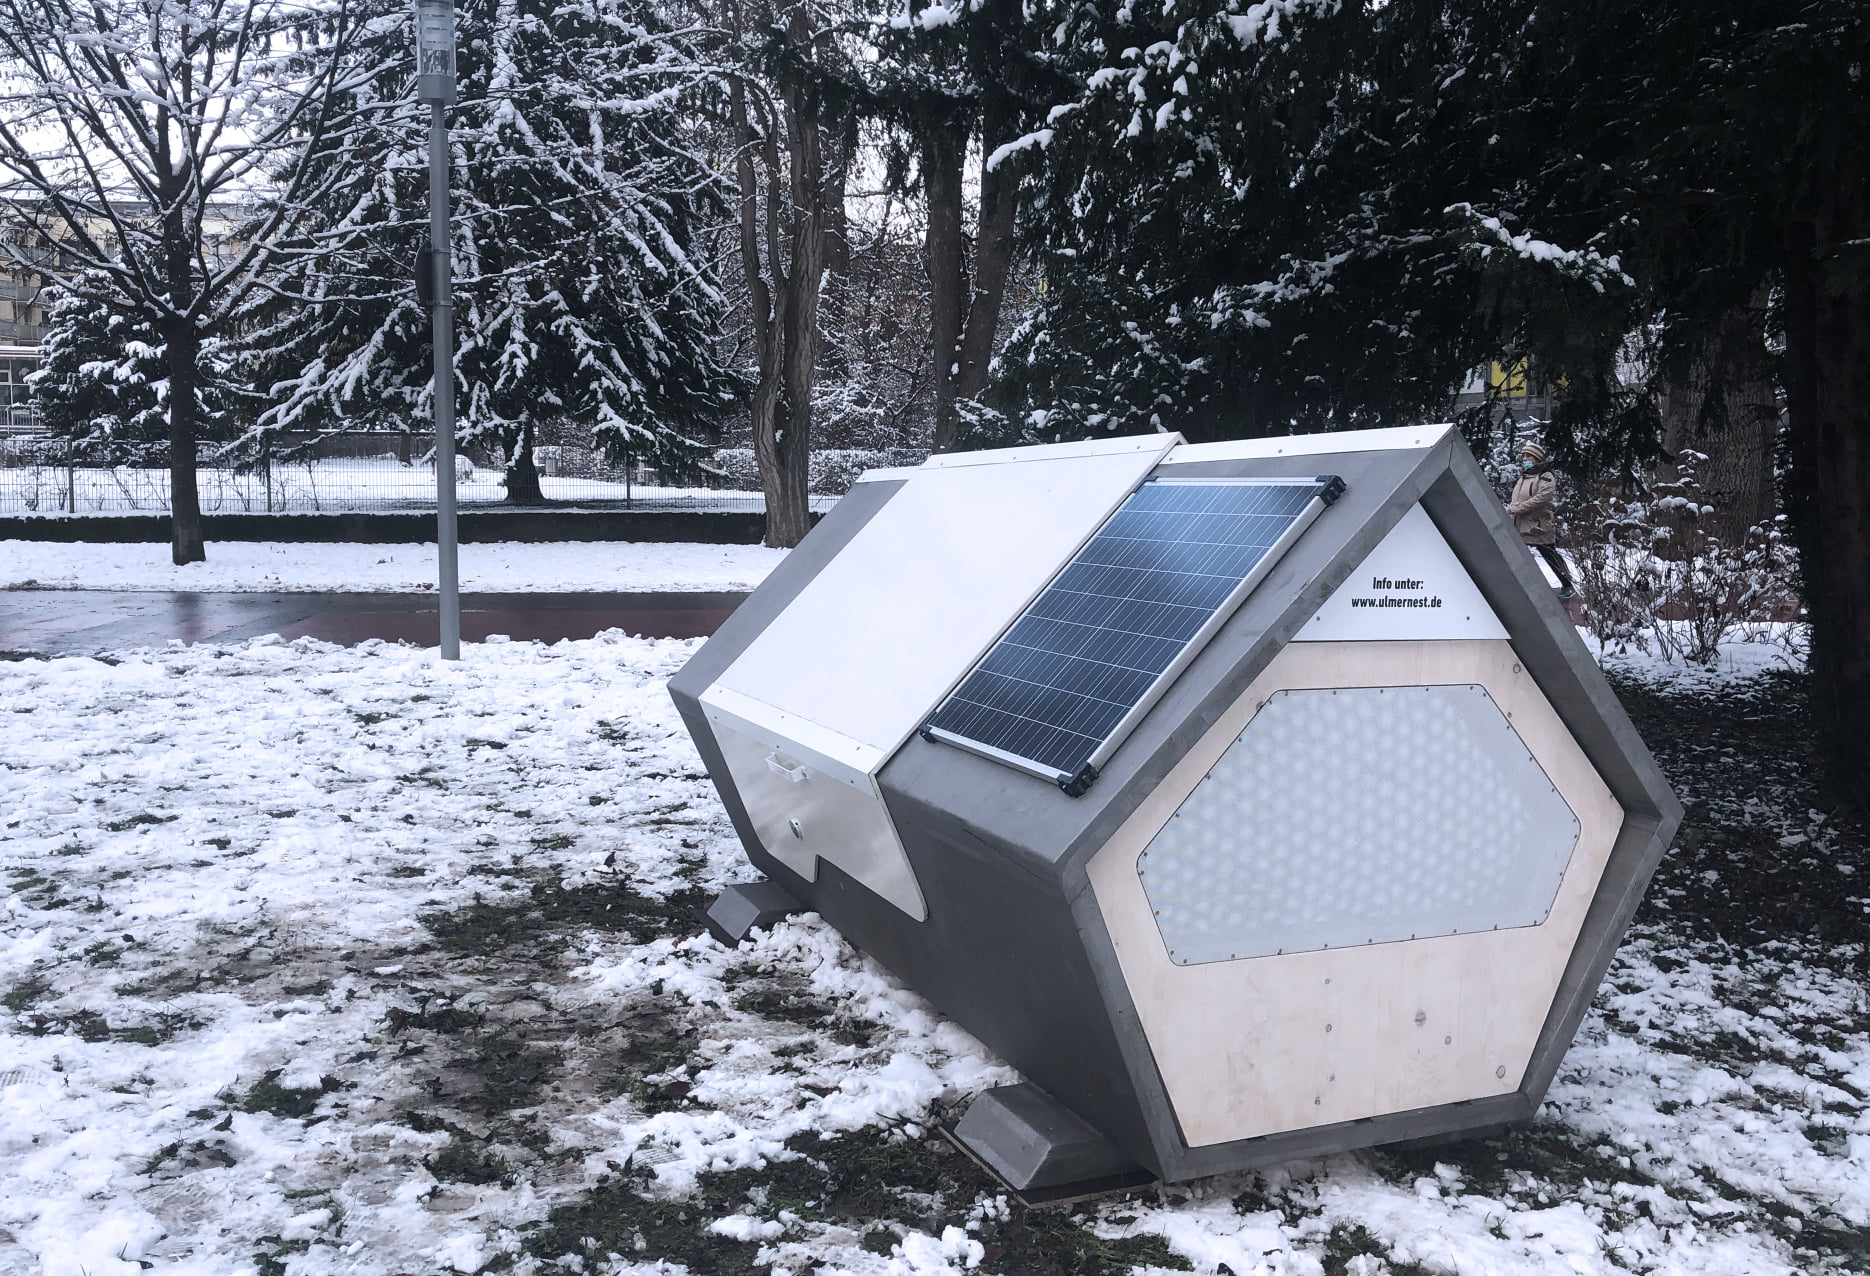 GERMAN CITY INSTALLS THERMALLY INSULATED SLEEPING PODS FOR THE HOMELESS PhpNTygYR